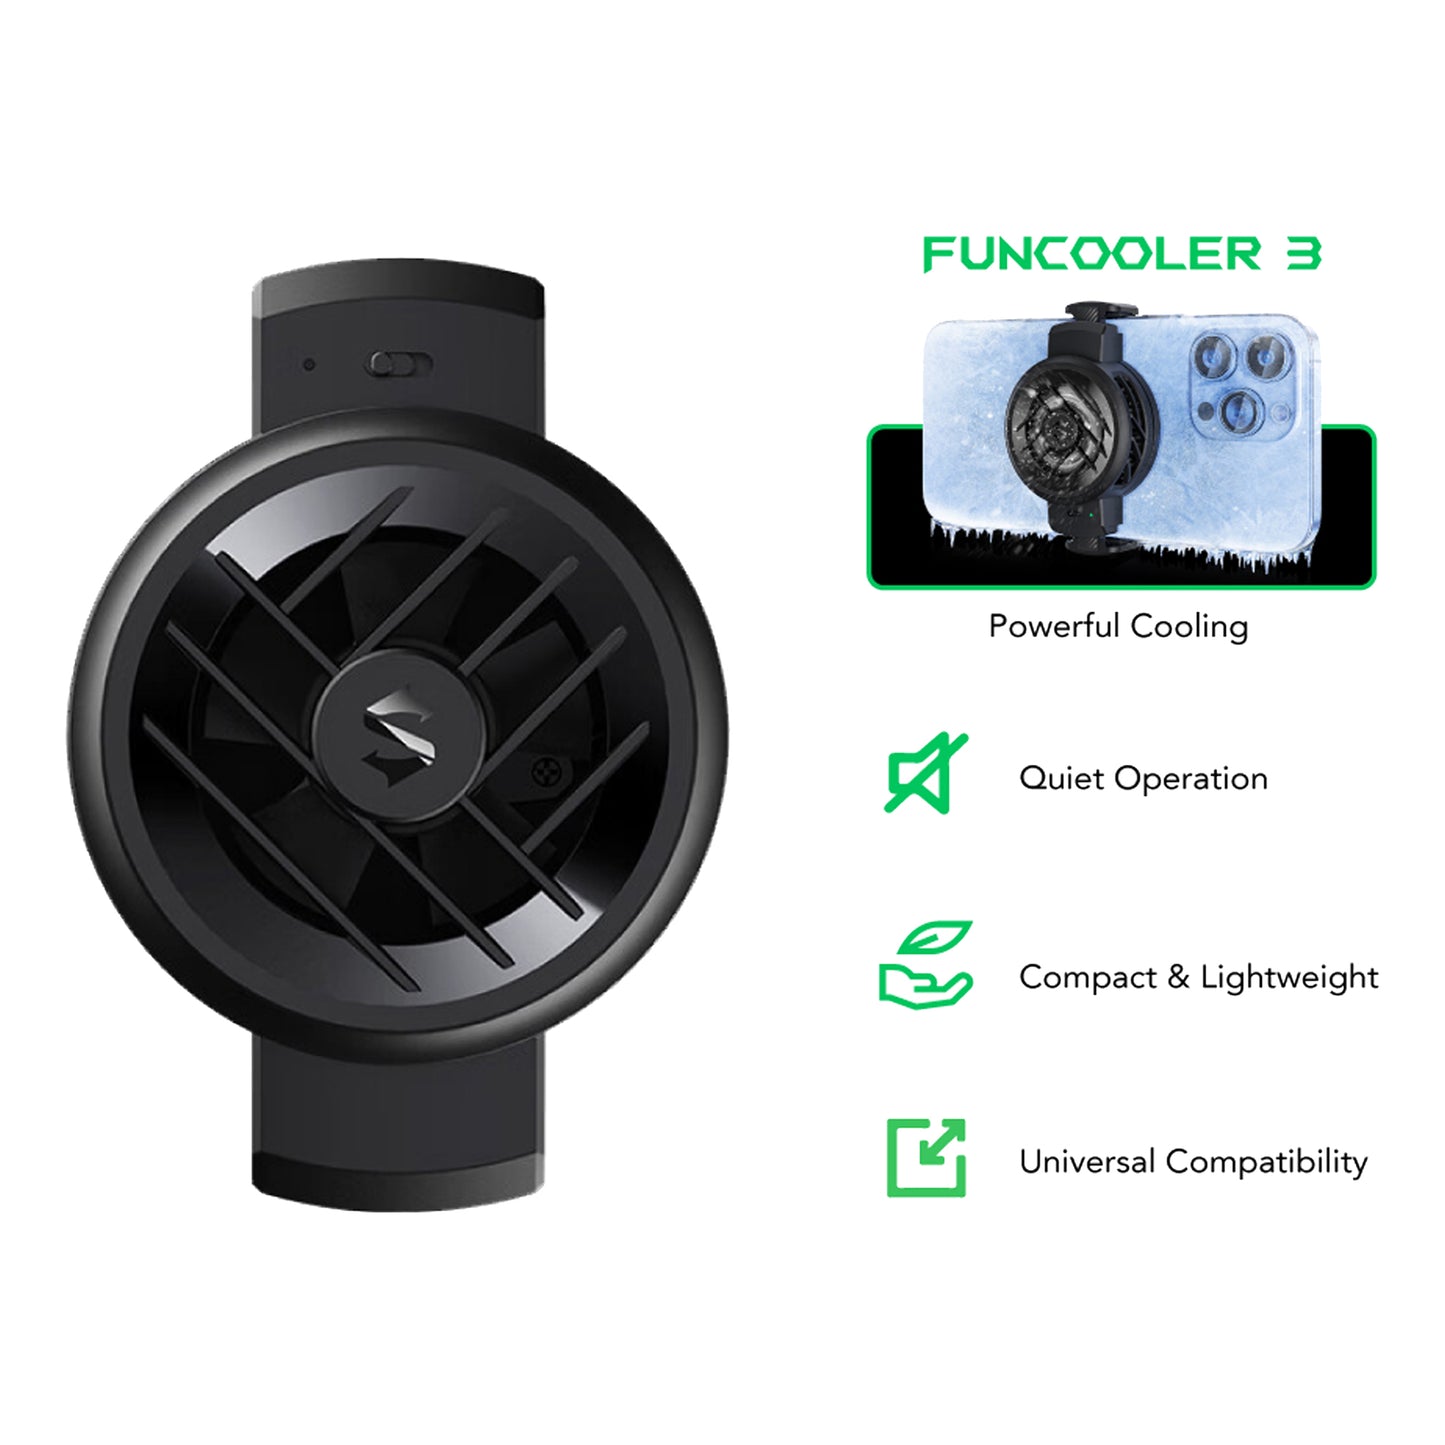 Black Shark Fun Cooler 3 for Gaming , Ultra-High Speed Cooling Fan Universal Compatibility